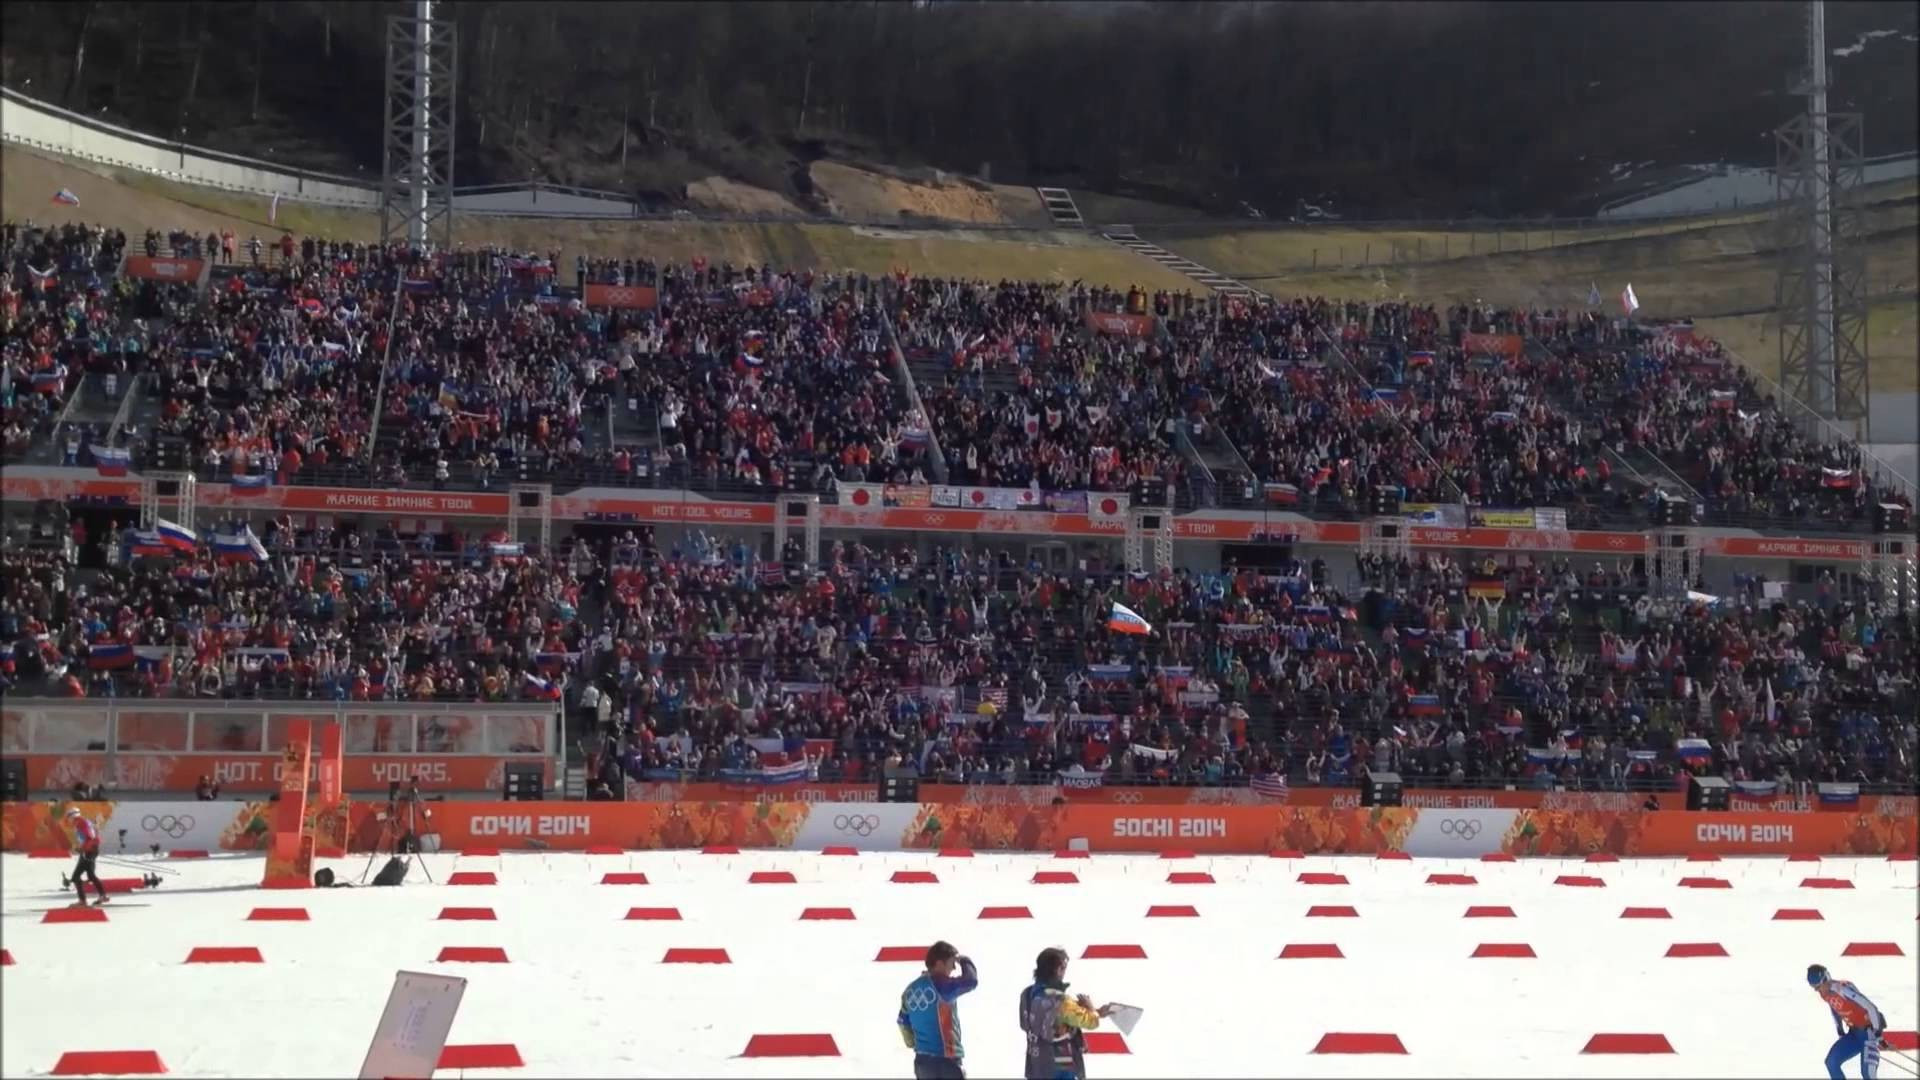 There were initial fears over low ticket sales for Sochi 2014 but crowds were generally good ©YouTube